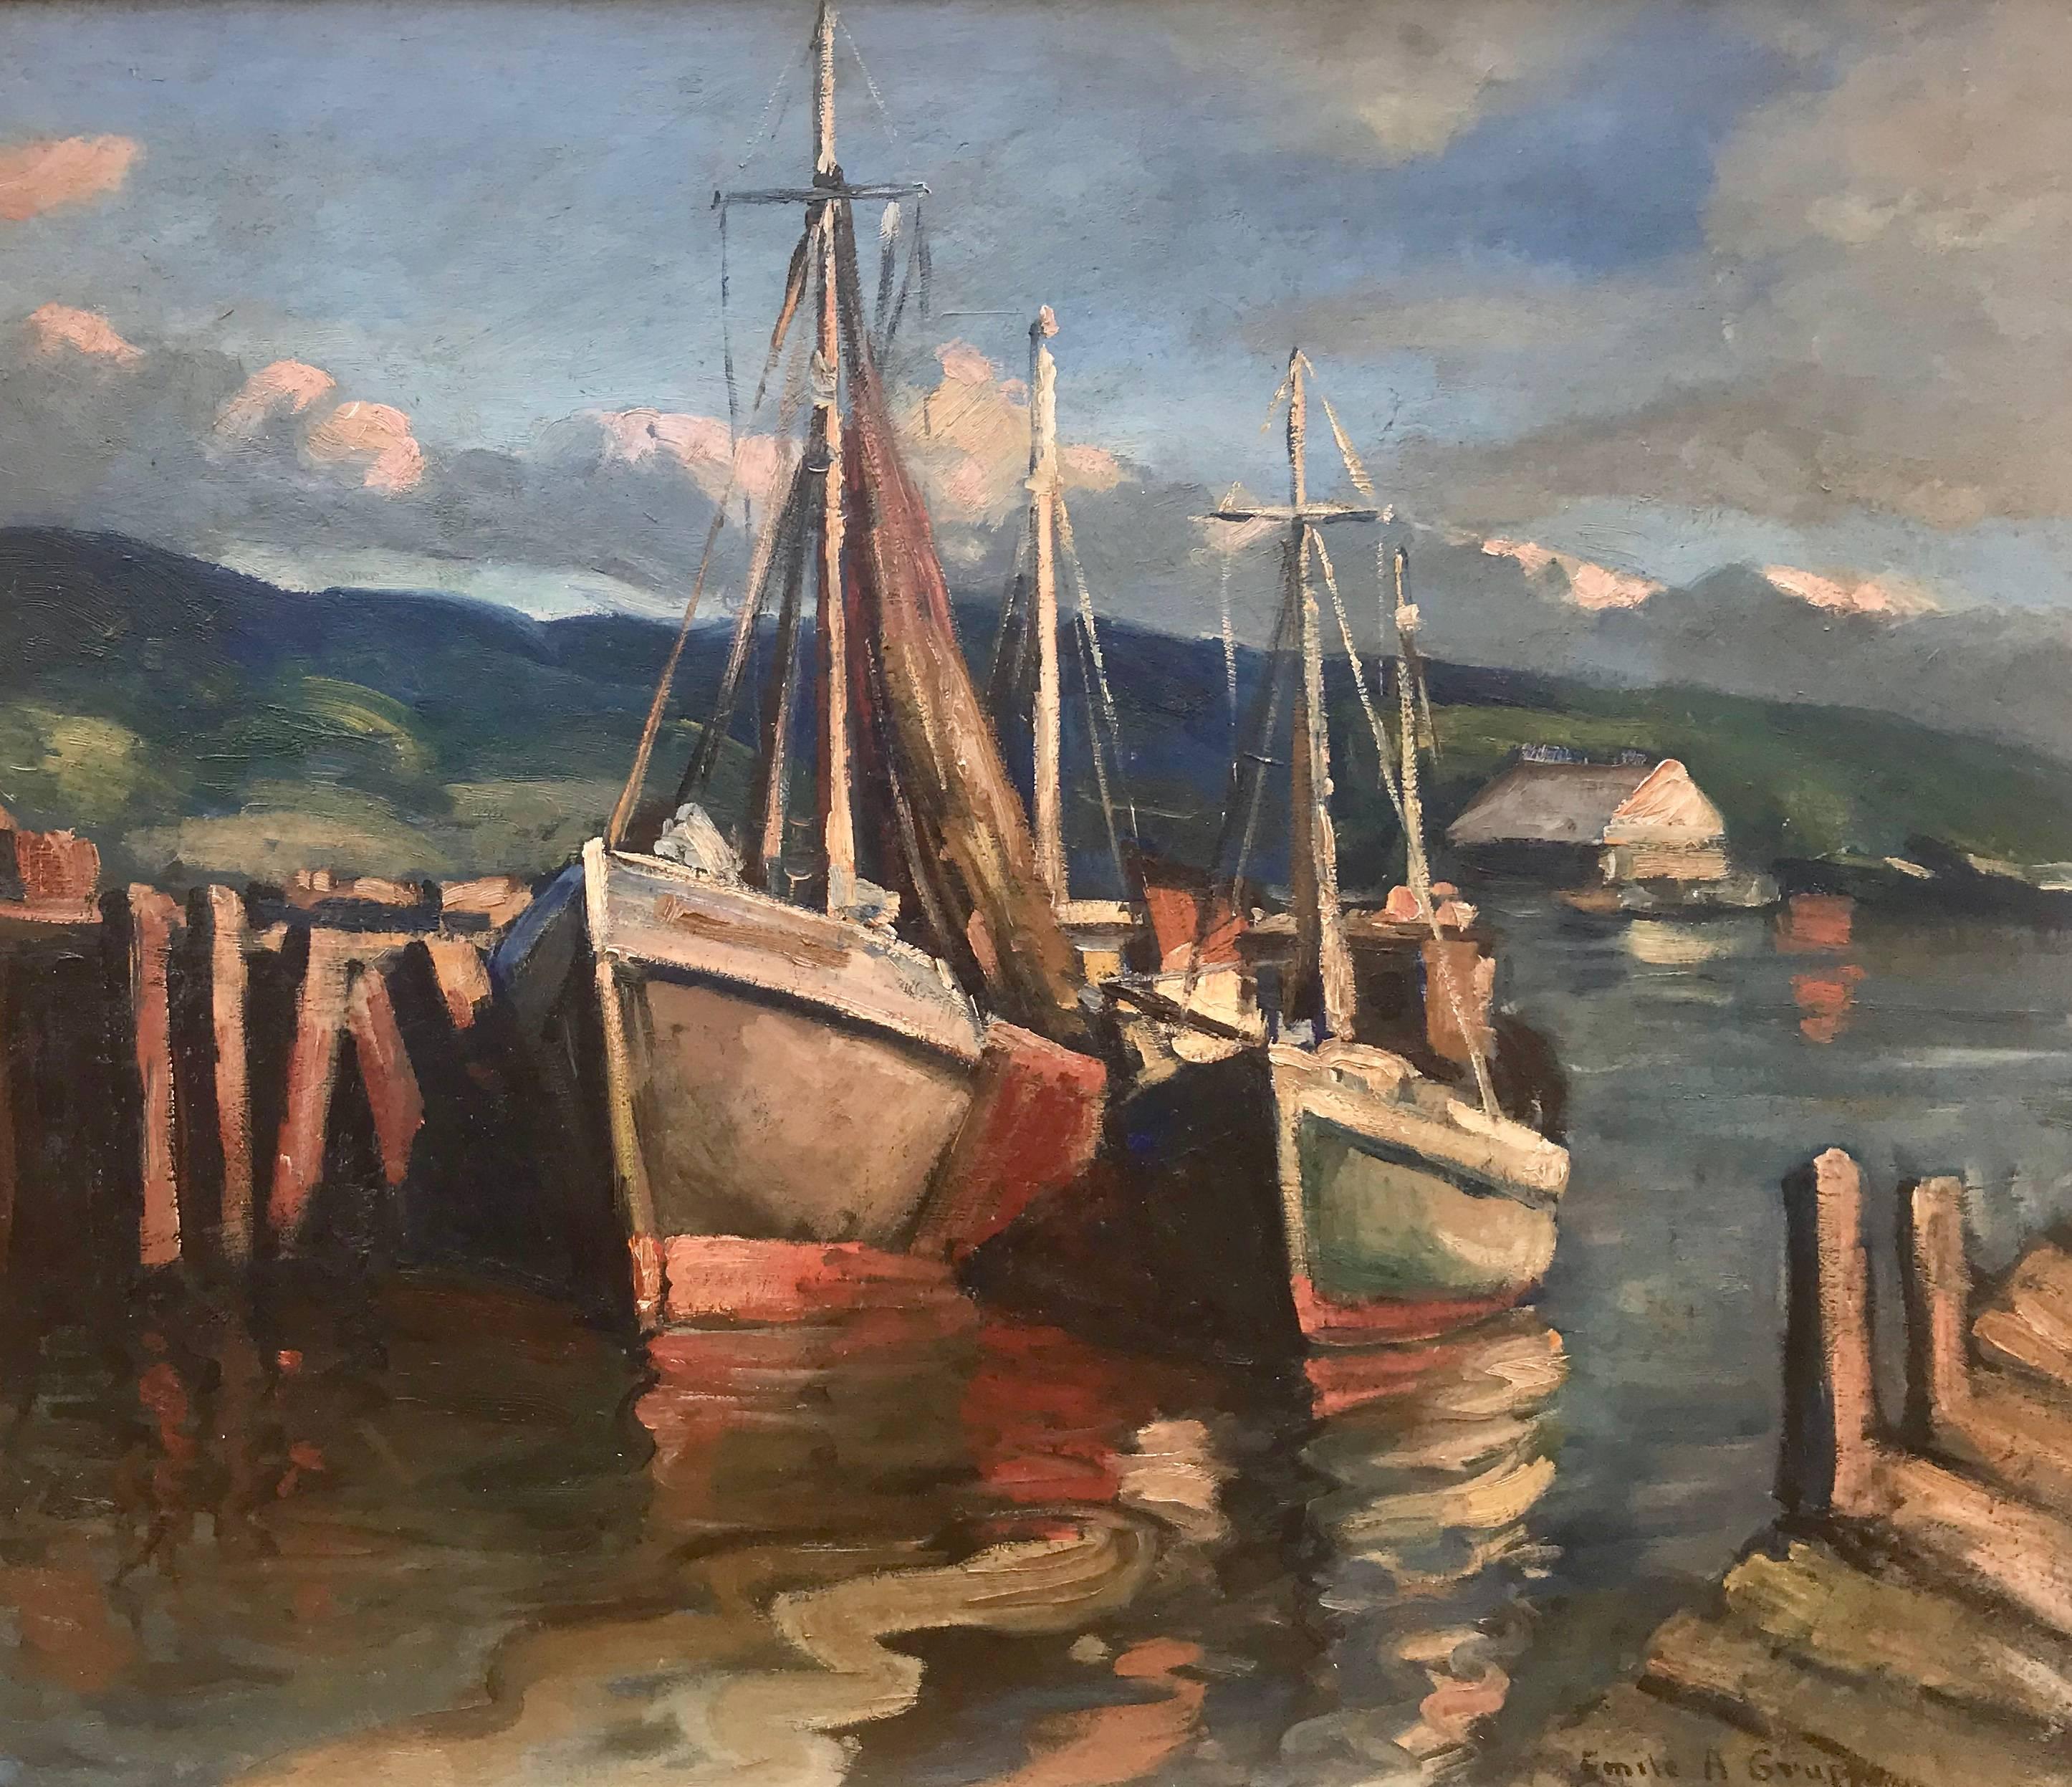 Oil on board painting by Emile A. Gruppe of fishing boats in Gloucester Harbor. Signed lower right. Good original condition.  No restorations. The painting is housed in a custom made Motyka gold leaf frame 28 by 32 inches overall.  Provenance:  A